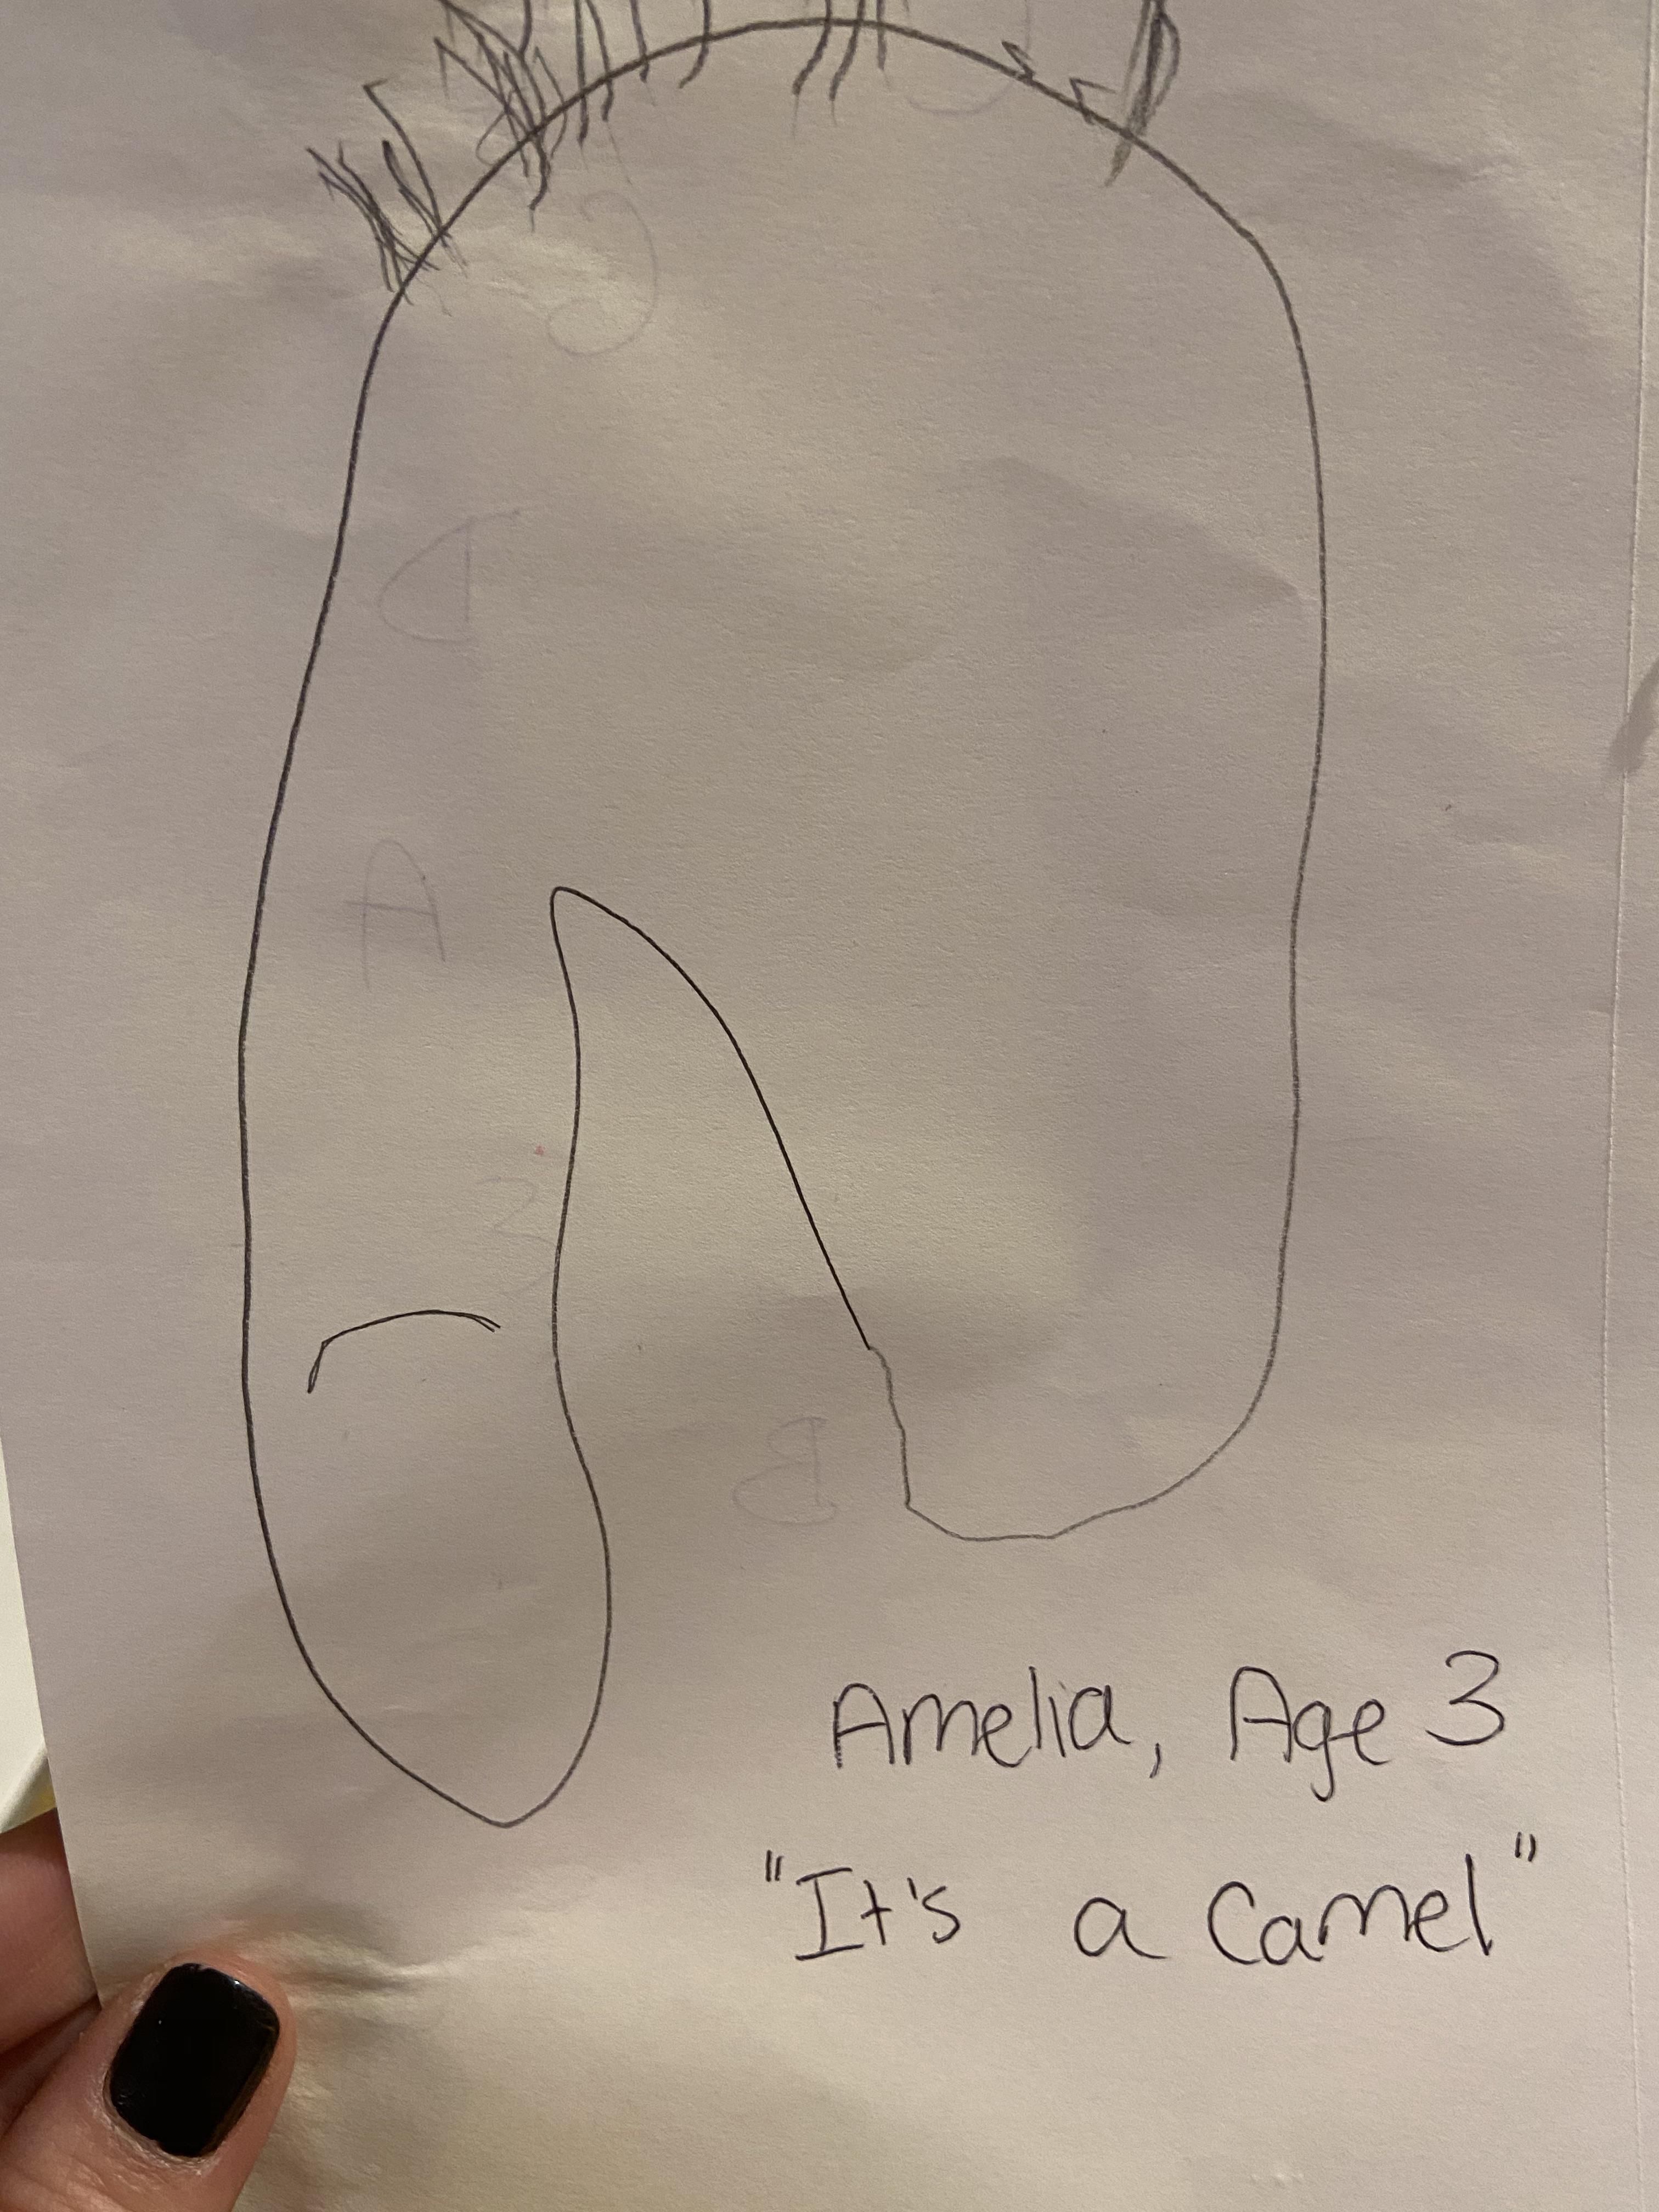 My 3-year-old drew a camel.